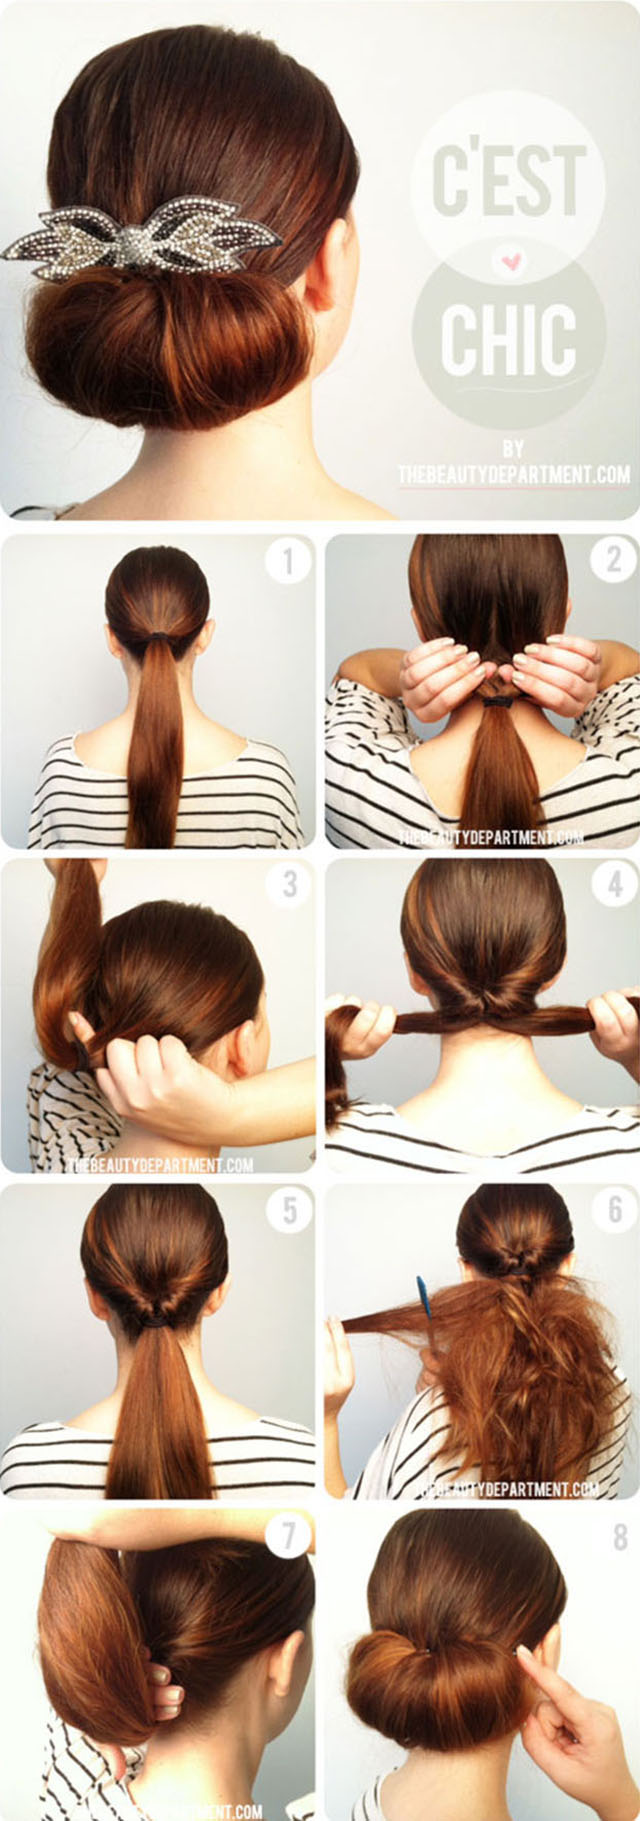 Easy and Fast DIY Hairstyle Tutorials 3